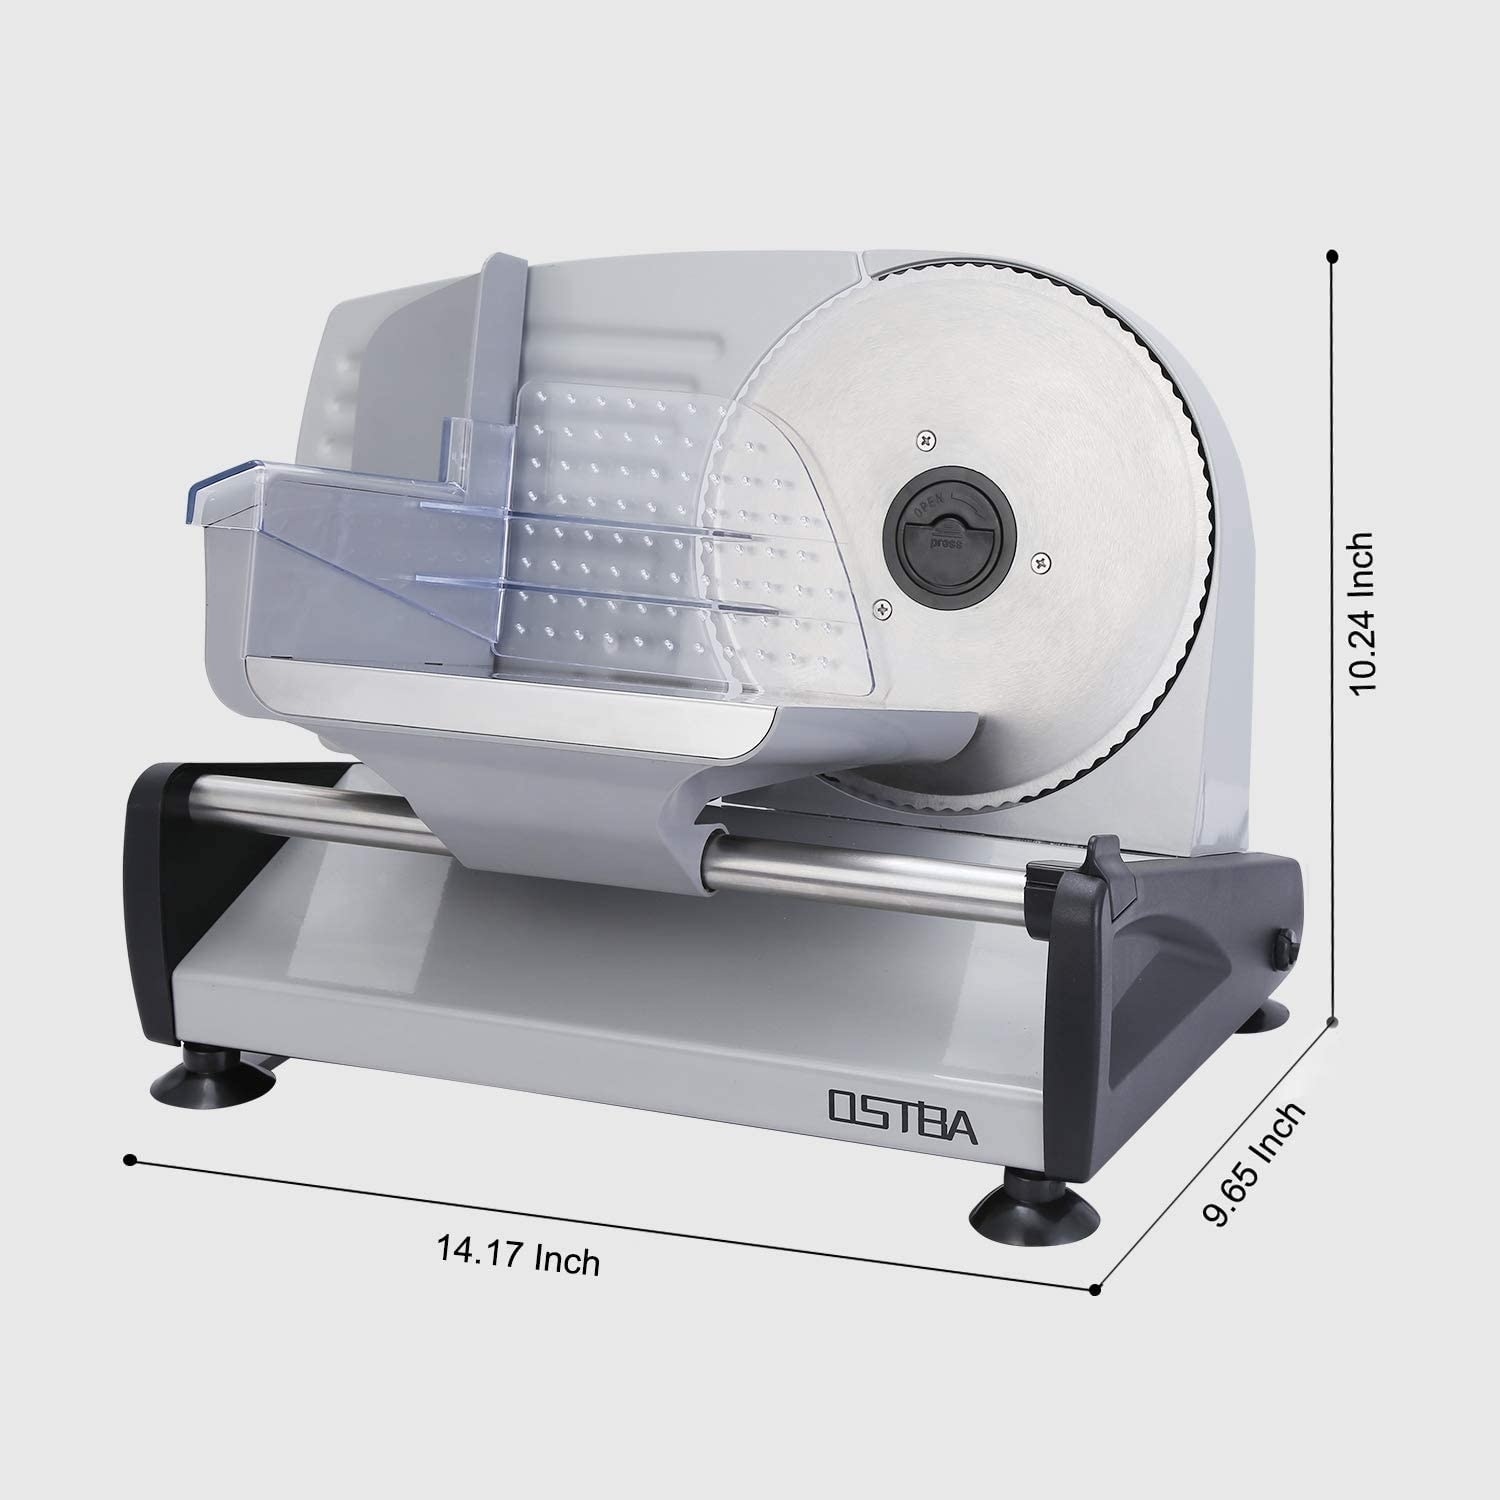 OSTBA Meat Slicer Blade Non-serrated Blade only for Electric Food Slicer  SL-518 and SL-518-1